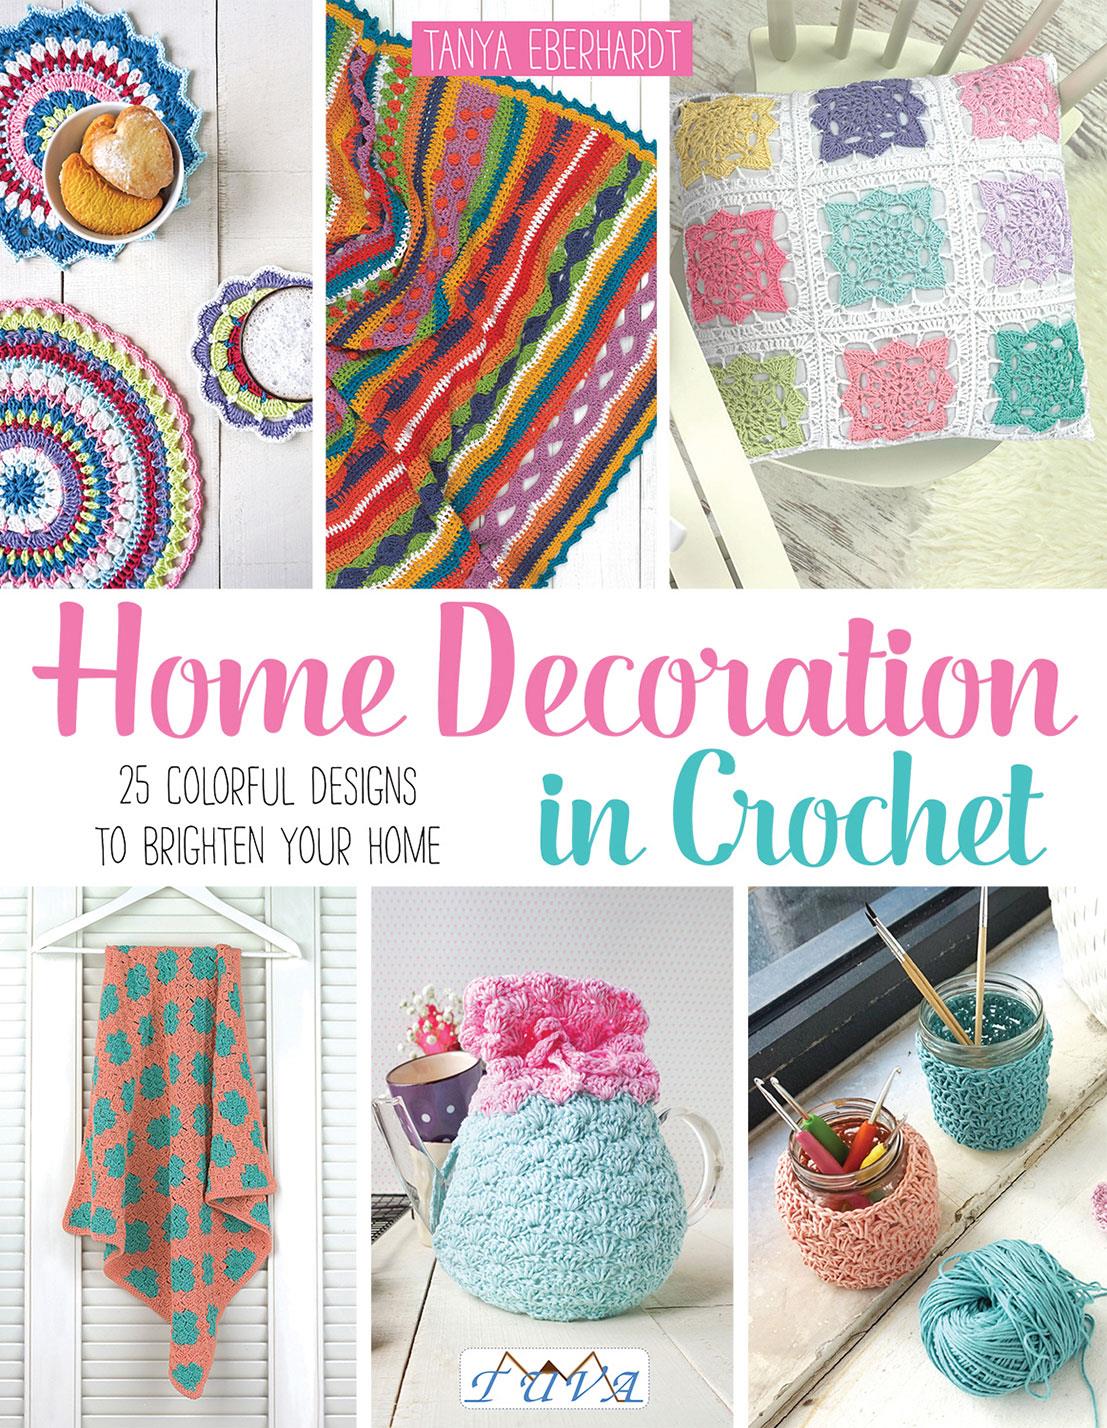 Home Decoration in Crochet - Pattern Book by Tanya Eberhardt